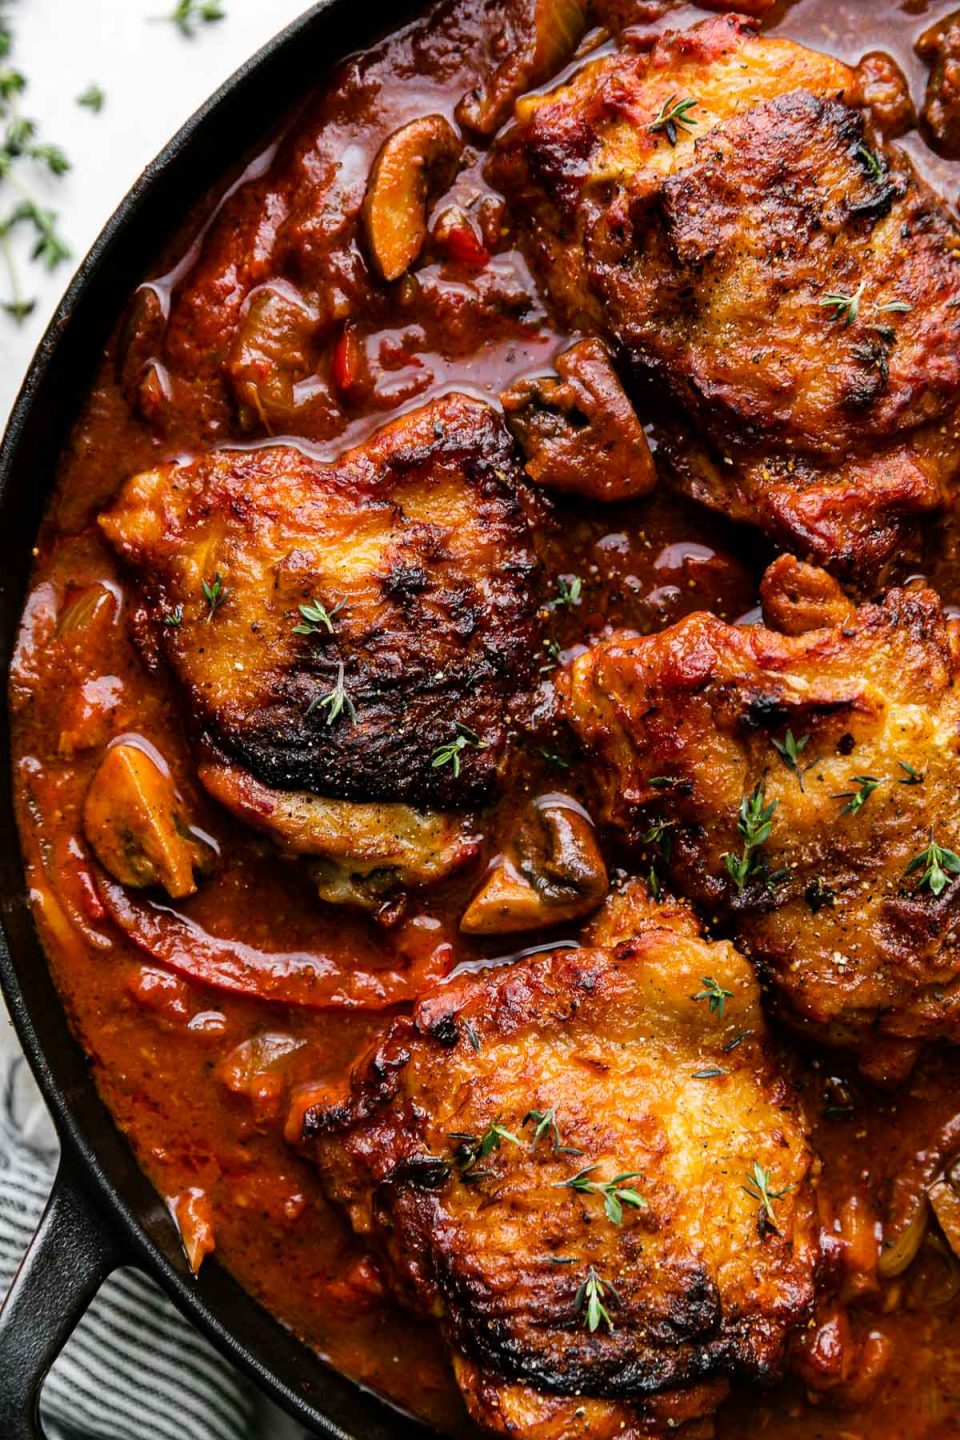 A close up of chicken cacciatore in a black heavy-bottomed cast iron skillet. The skillet sits atop a creamy white plaster surface with a blue and white striped napkin resting alongside and a few sprigs of thyme also sprinkled next to the skillet.